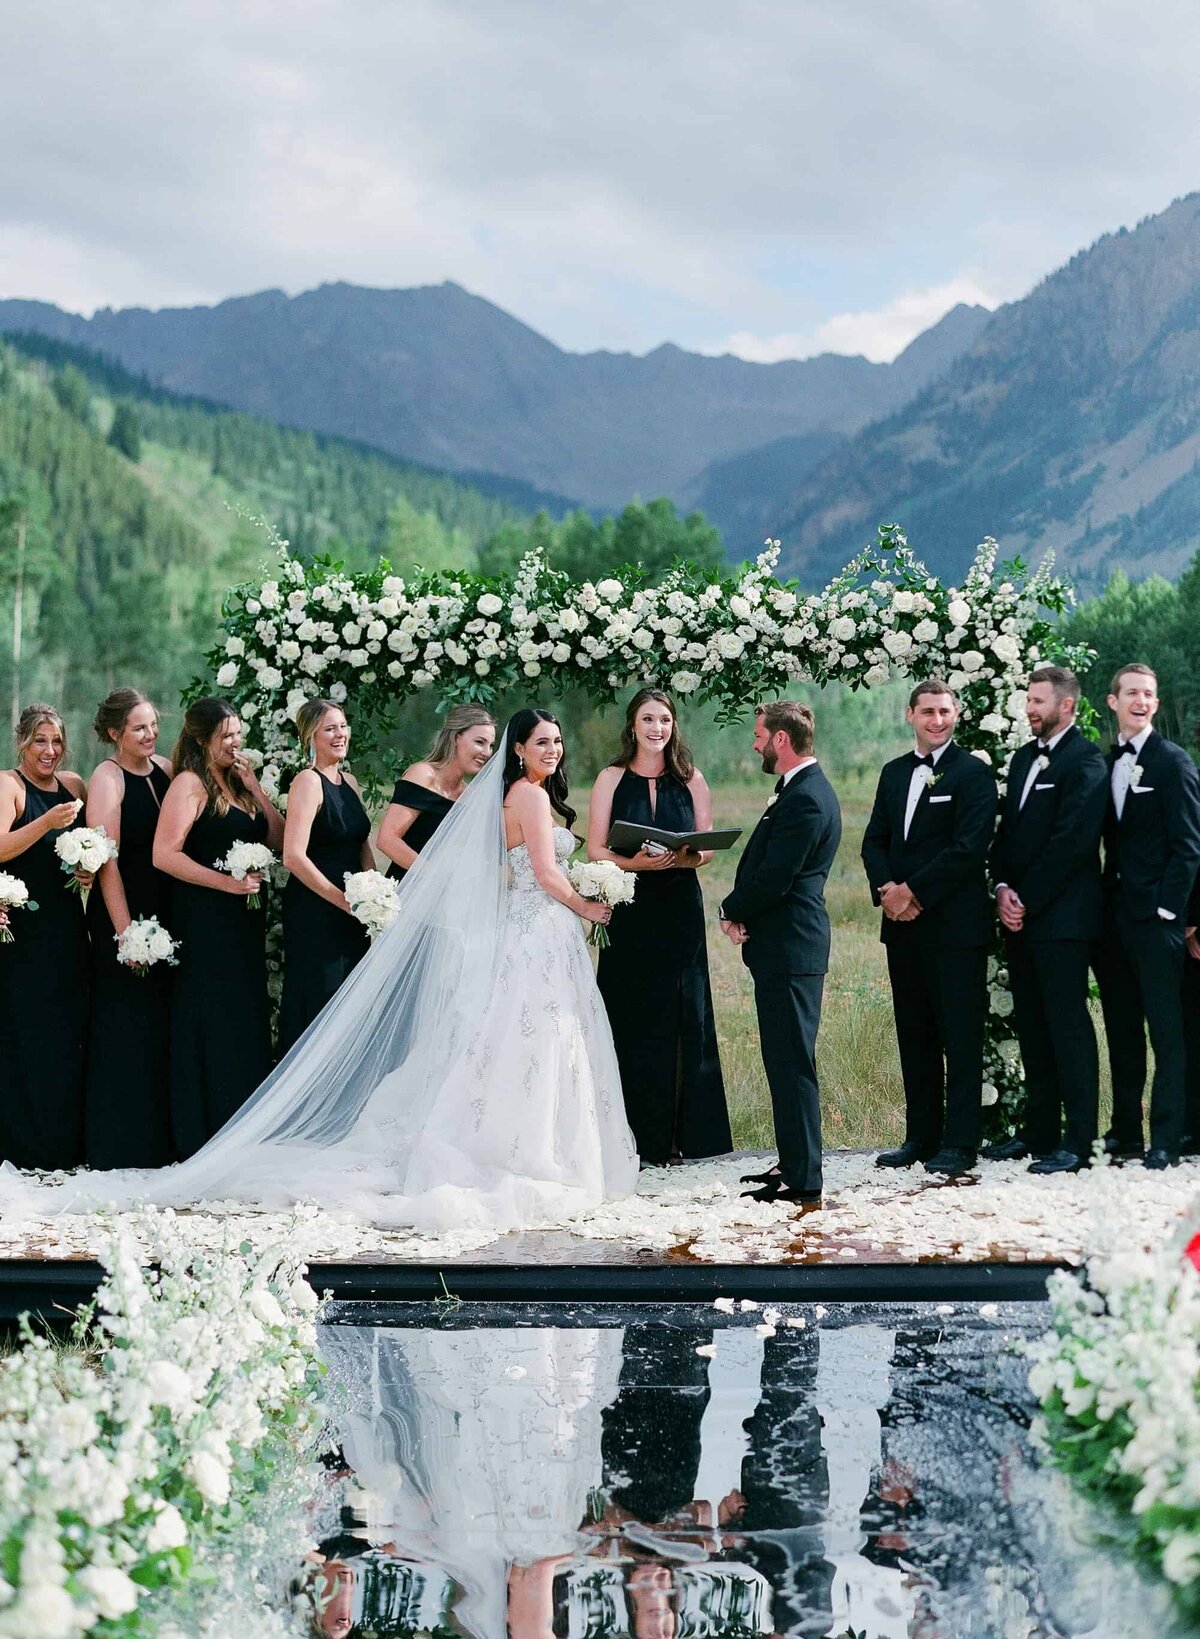 Outdoor wedding ceremony with a mountain backdrop